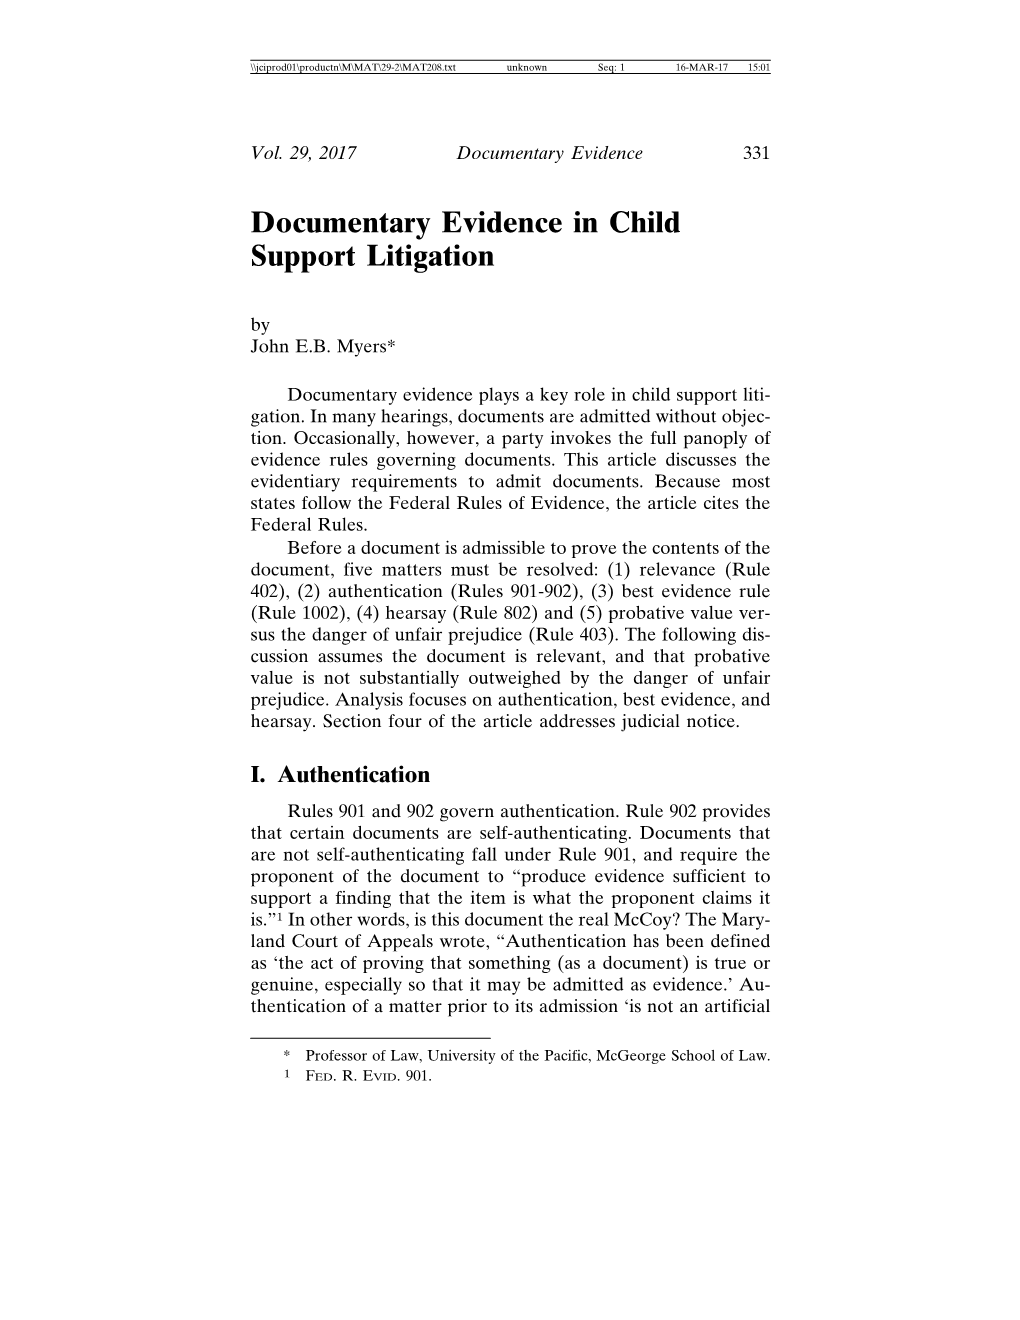 Documentary Evidence in Child Support Litigation by John E.B